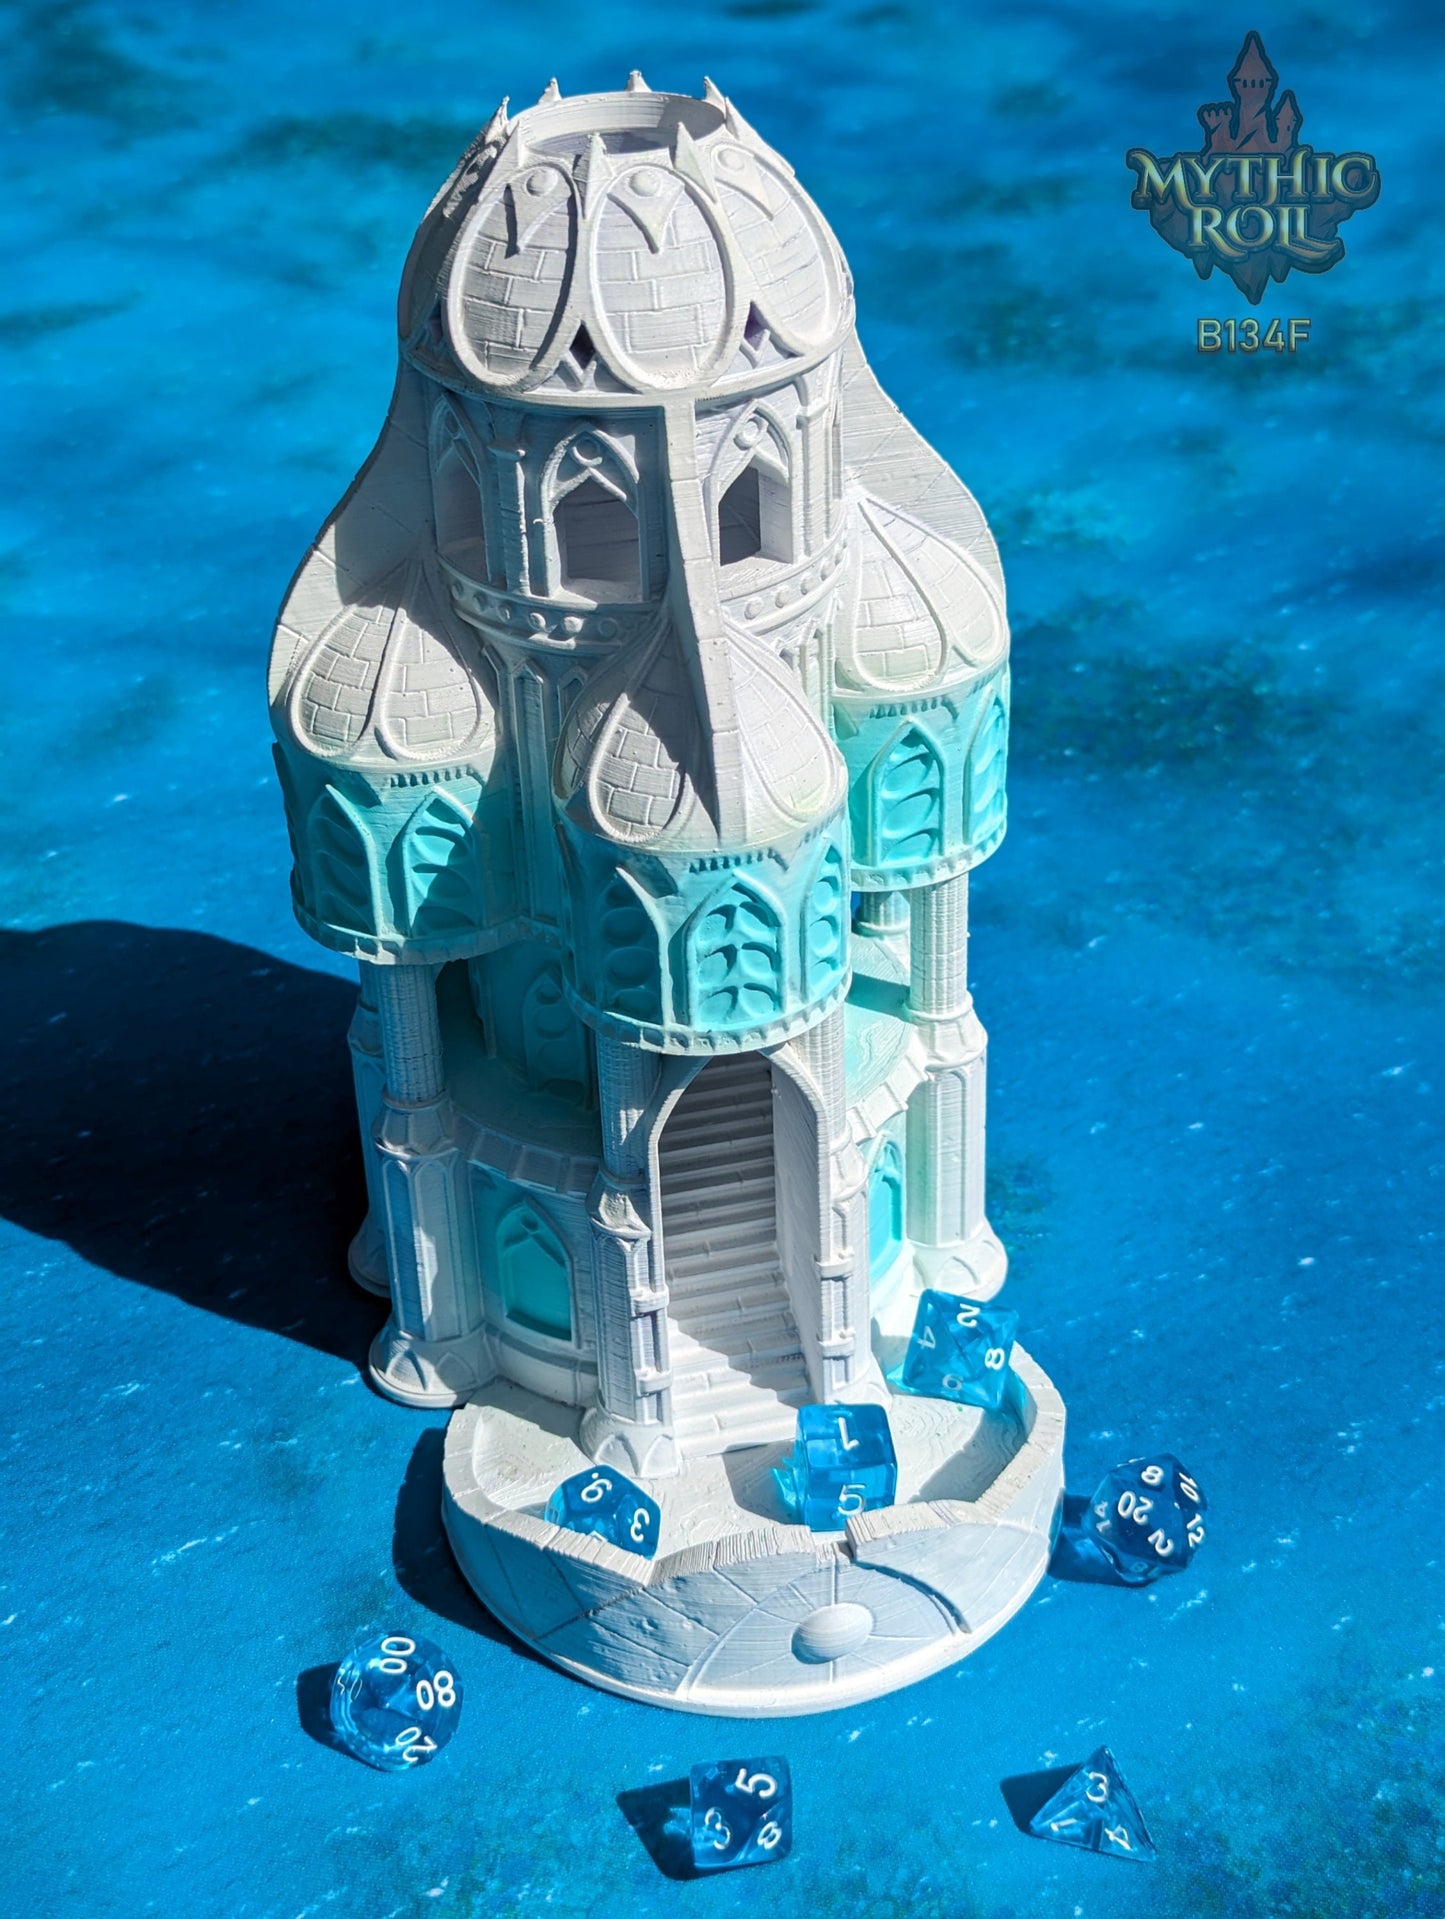 Siren Great Hall 3D Printed Dice Tower - Mythic Roll - Unchained Games - Echo Rolls Through the Melodies of Enchantment and Oceanic Majesty.